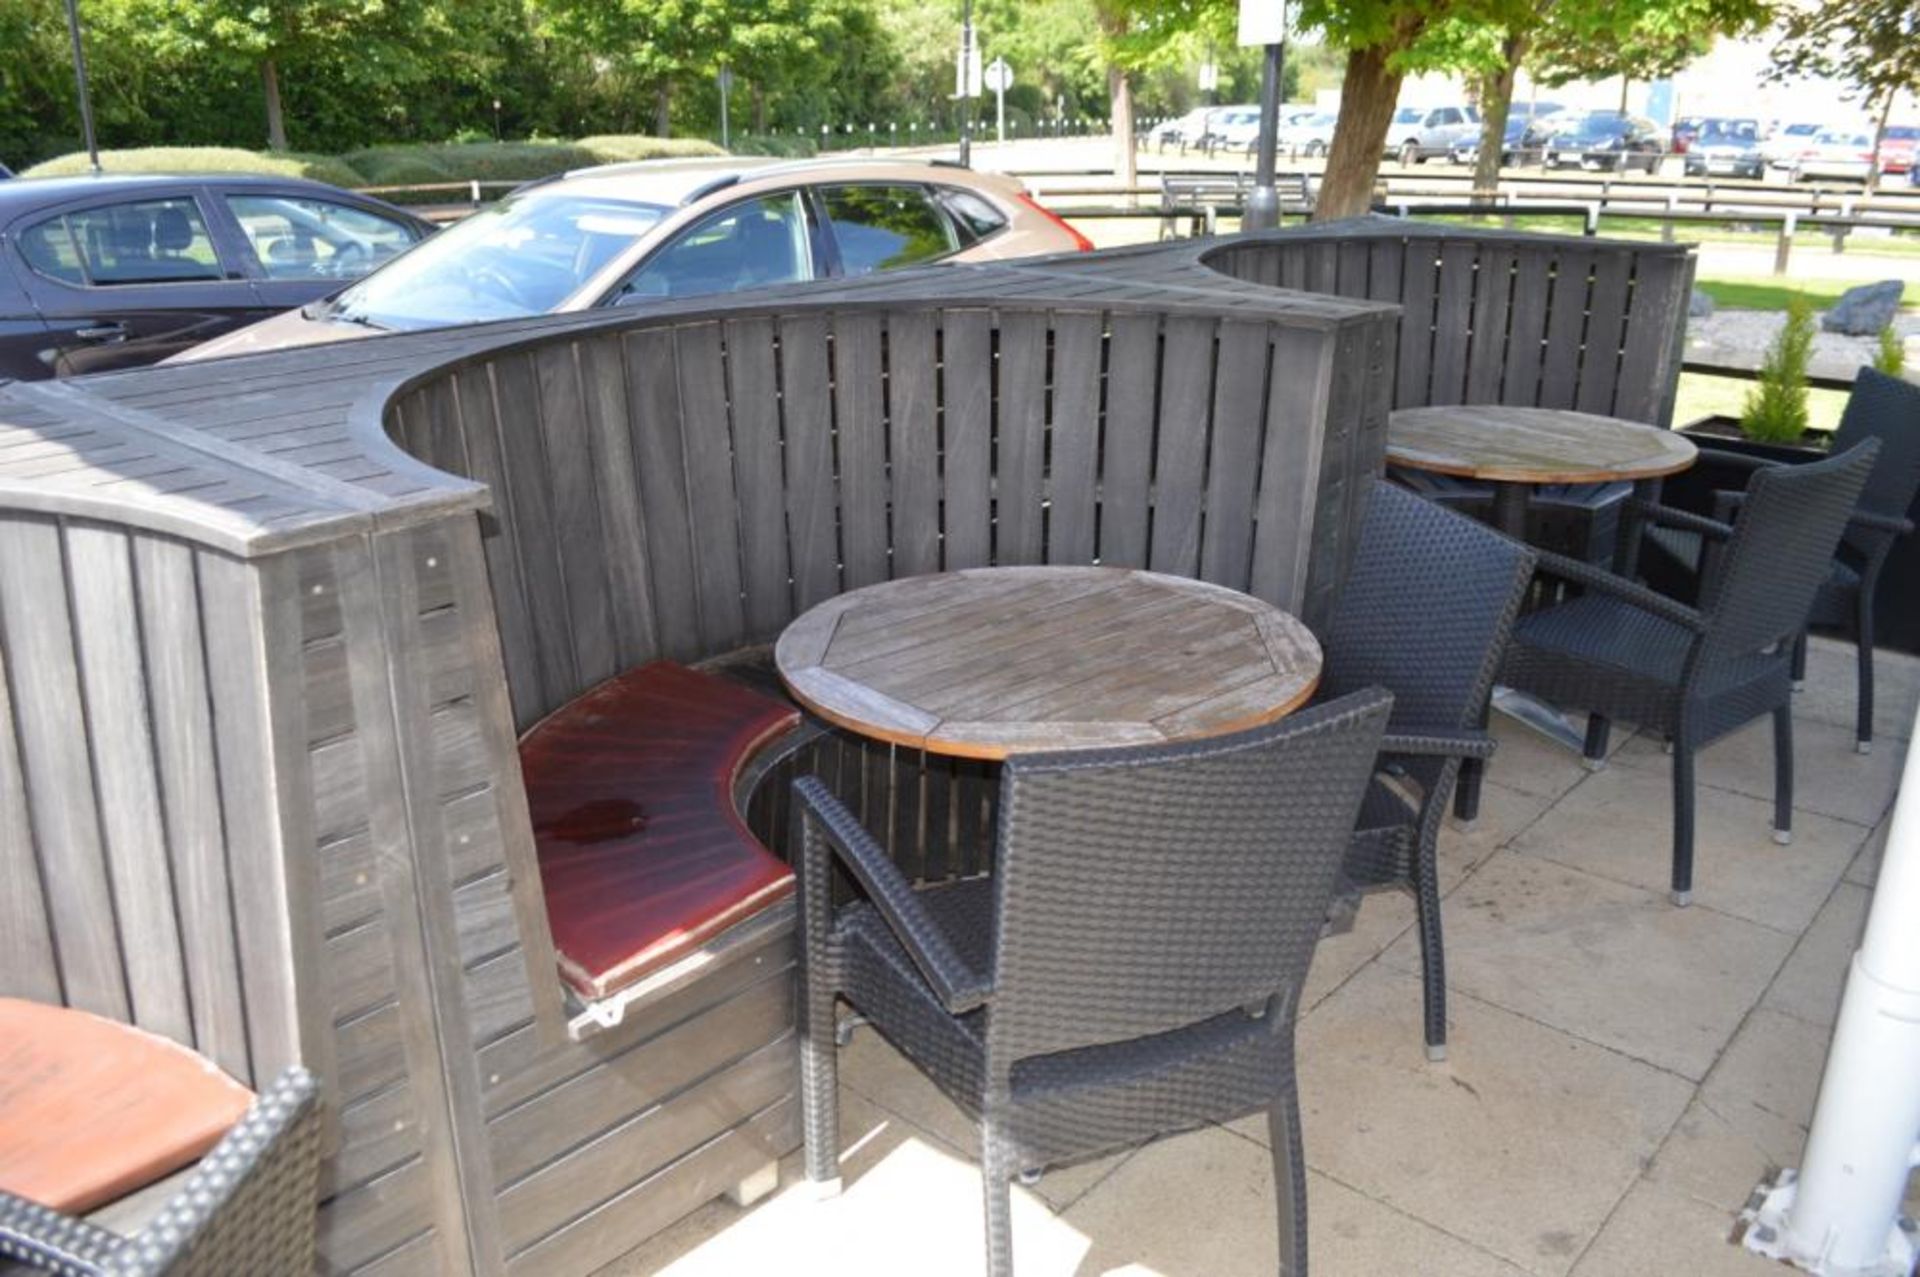 2 x Wooden Outdoor Seating Booths - Each Measure H111 x W203 x D106 cms - CL390 - Location: - Image 6 of 8